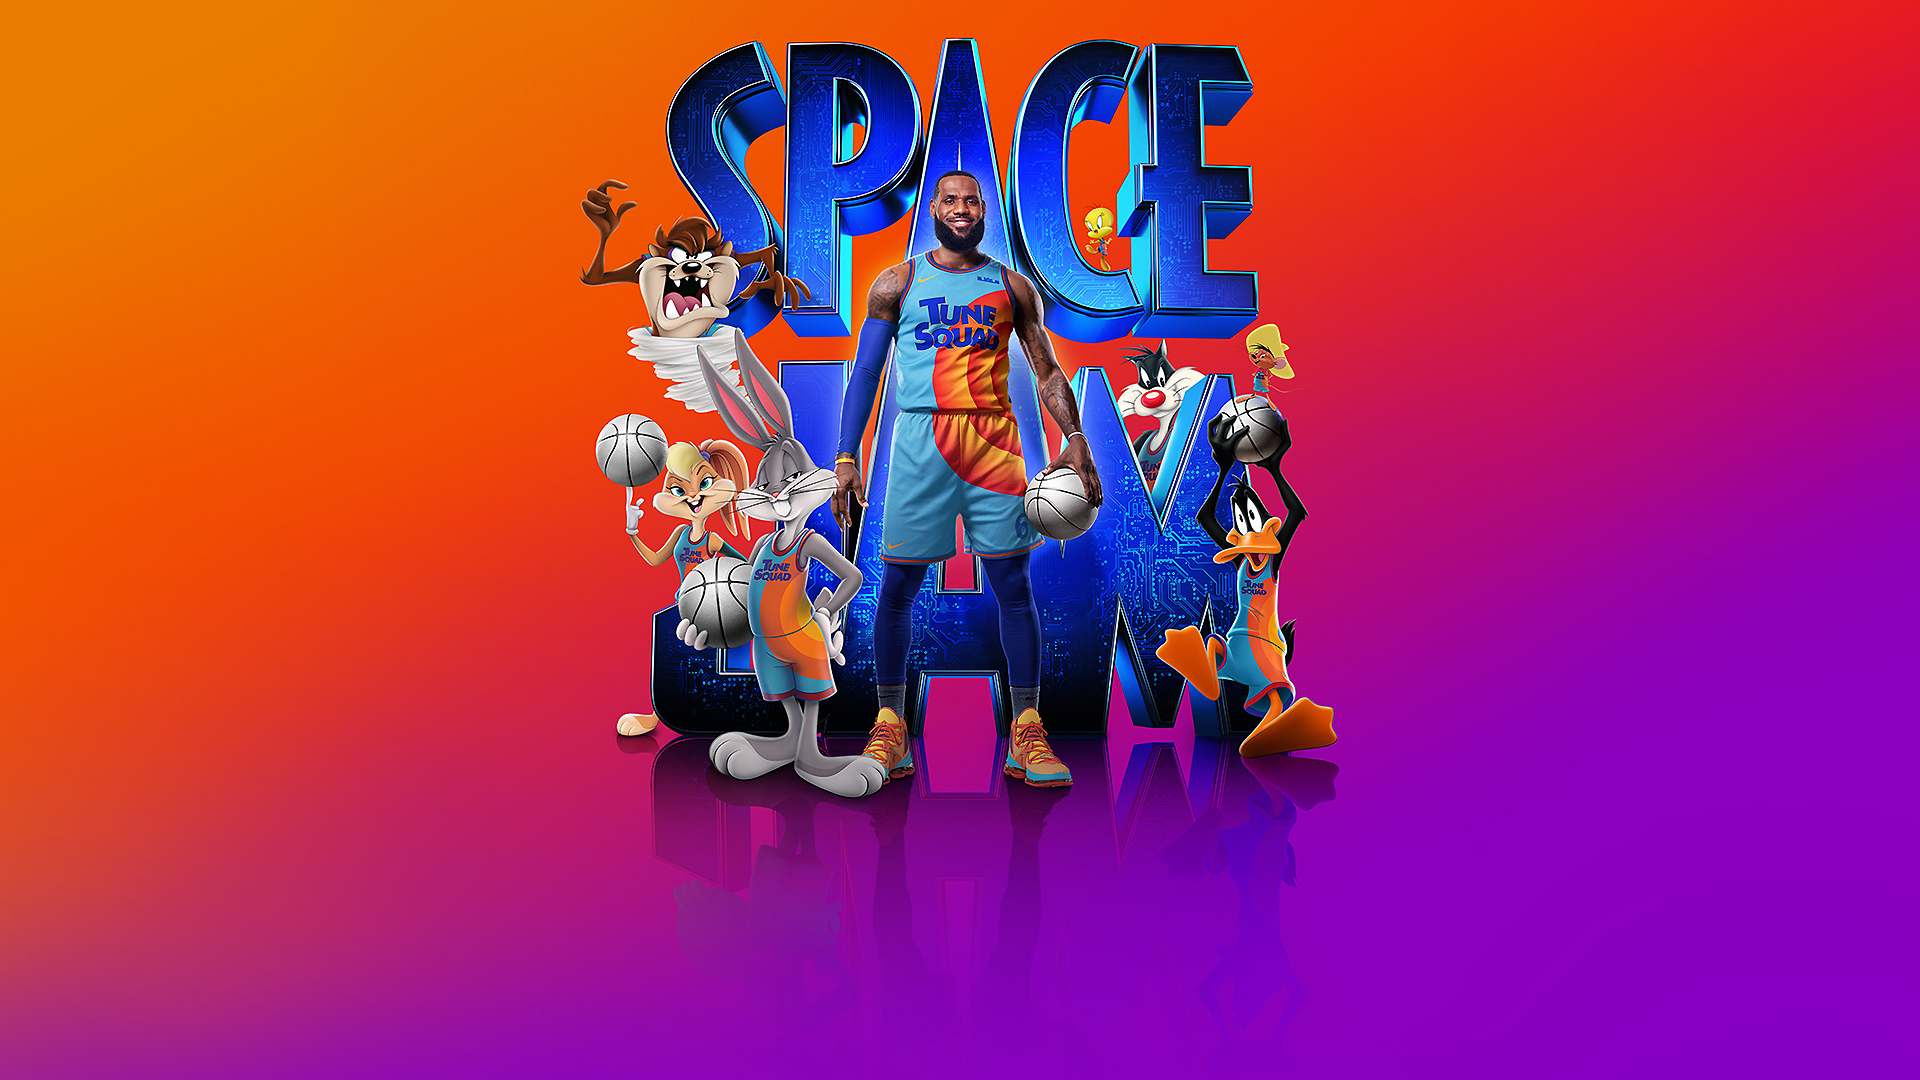 Photo of Space Jam 2 release date, cast, soundtrack and more information about LeBron James’ “New Legacy” film